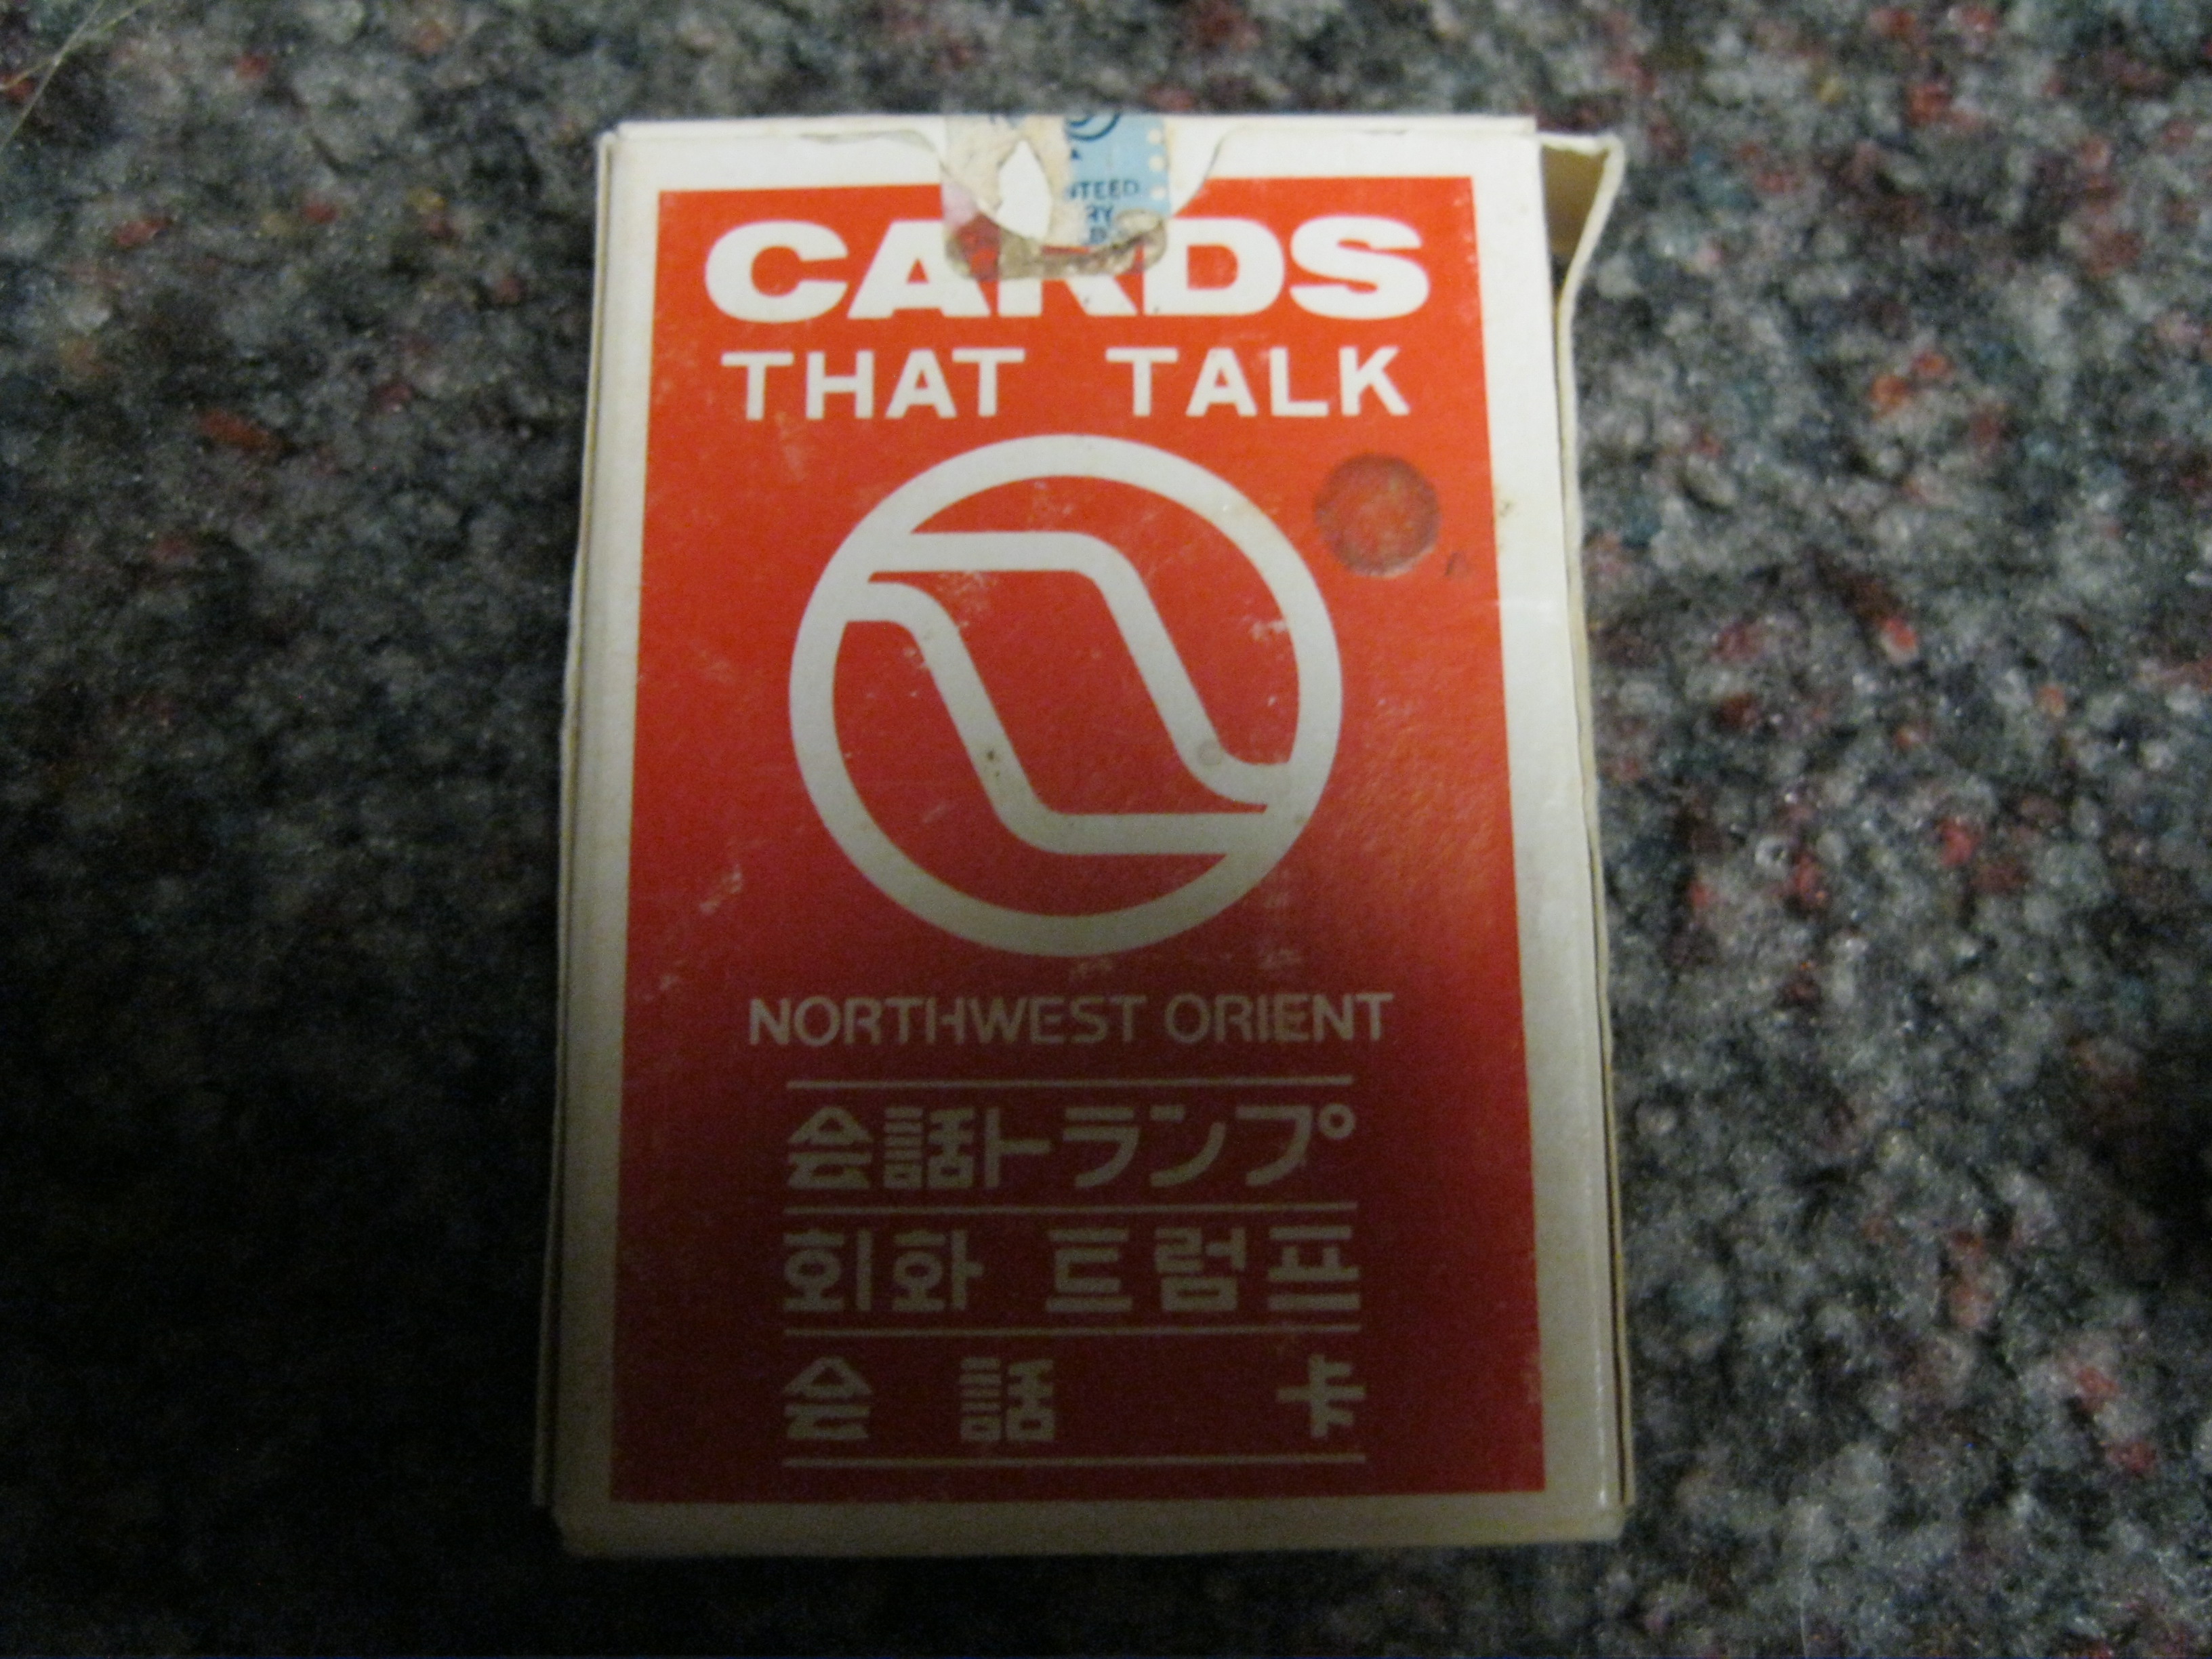 Northwest Orient cards that talk playing cards